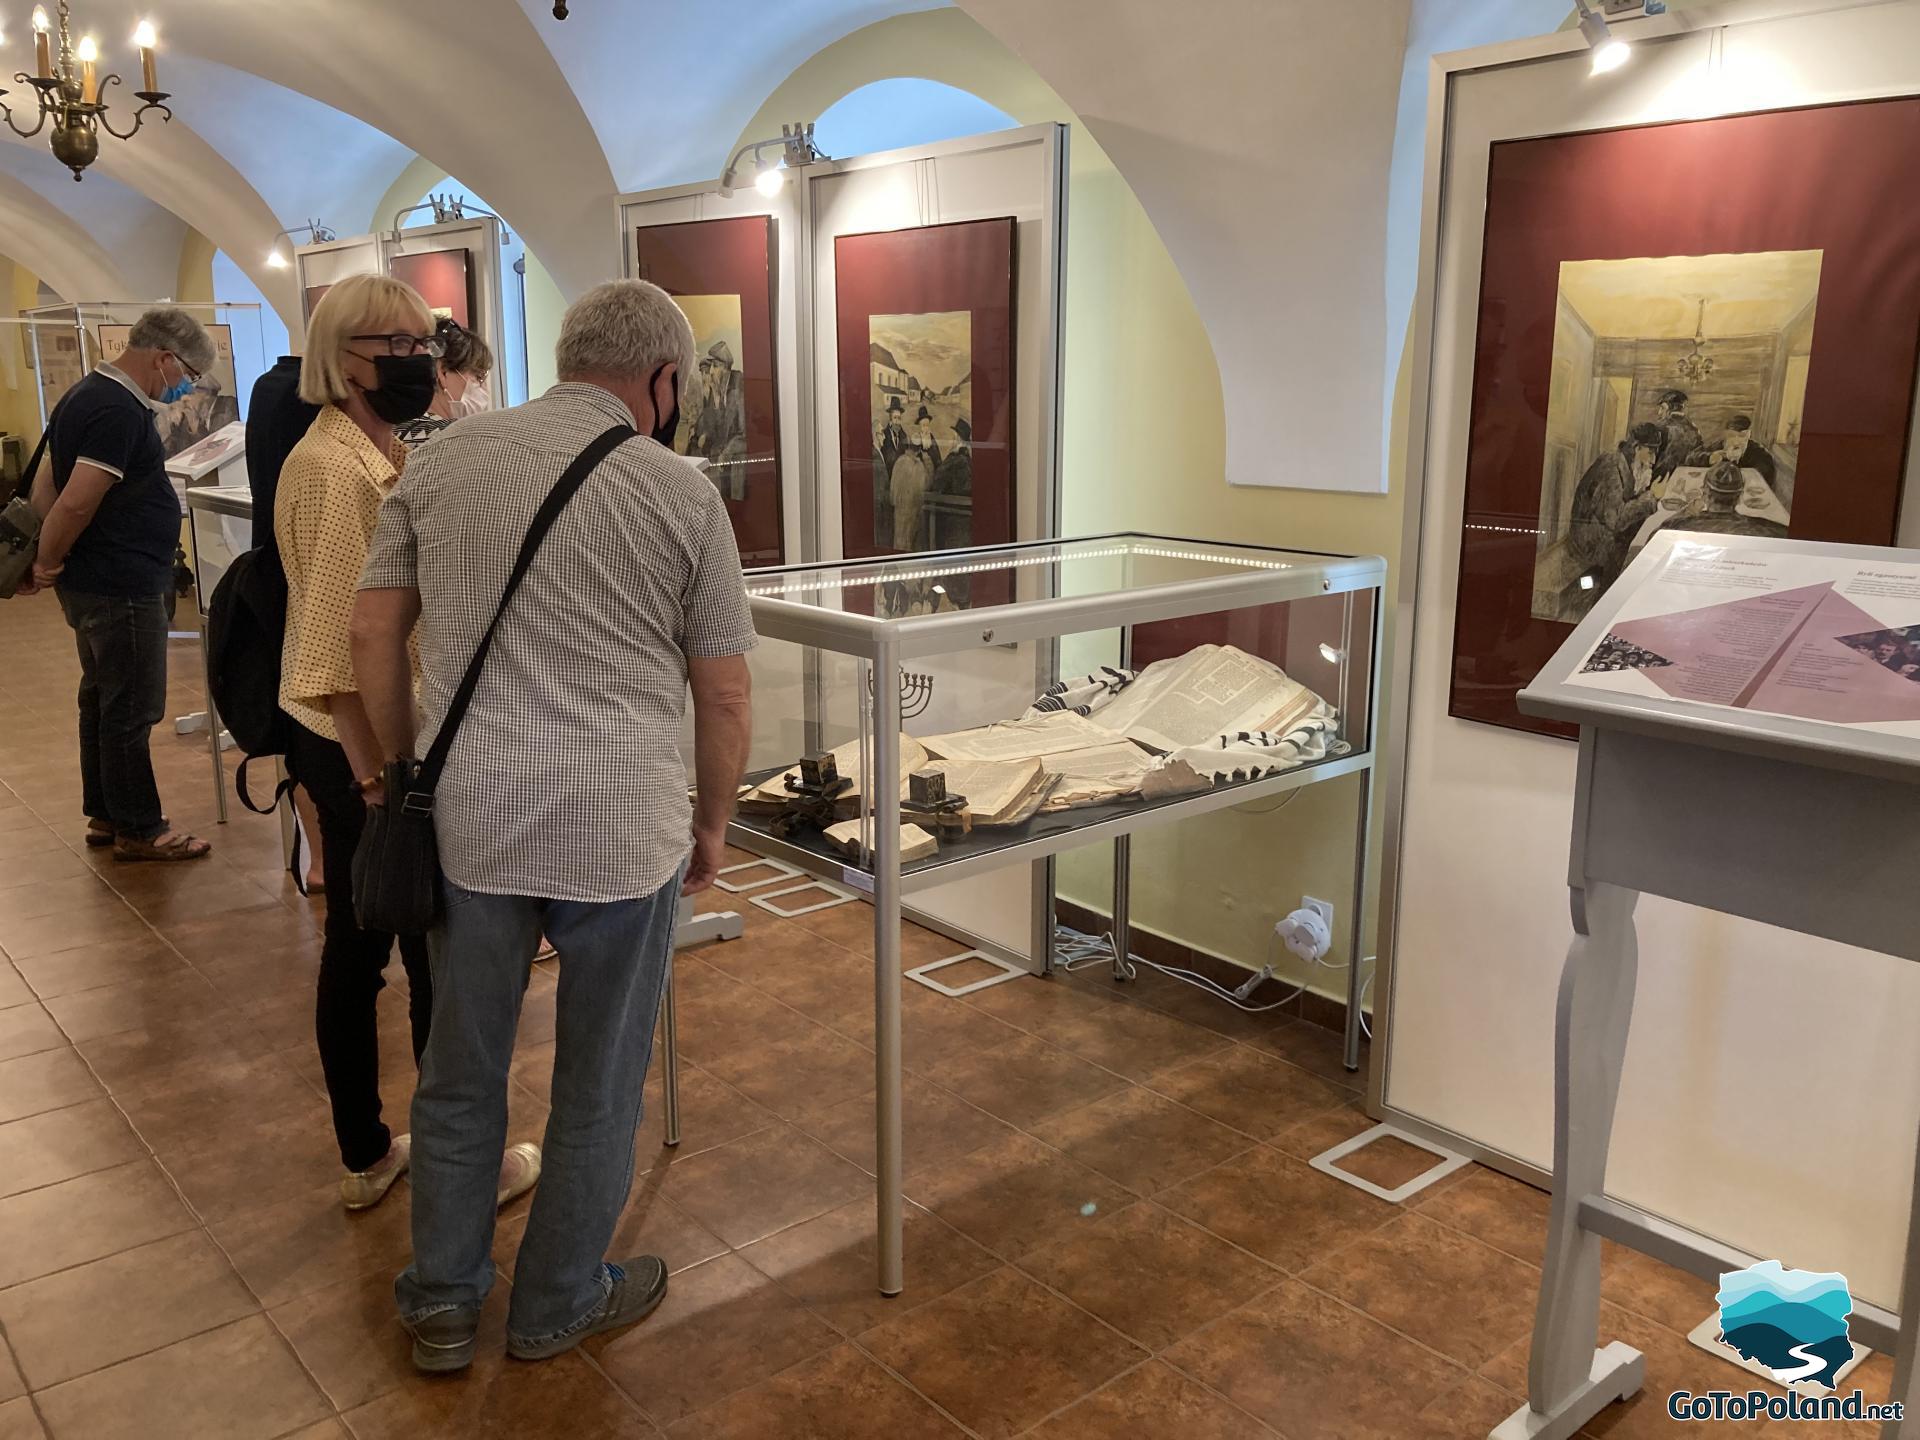 people are looking at the exhibits of Jewish culture that are in display cases, on the walls there are paintings depicting Jews in various activities